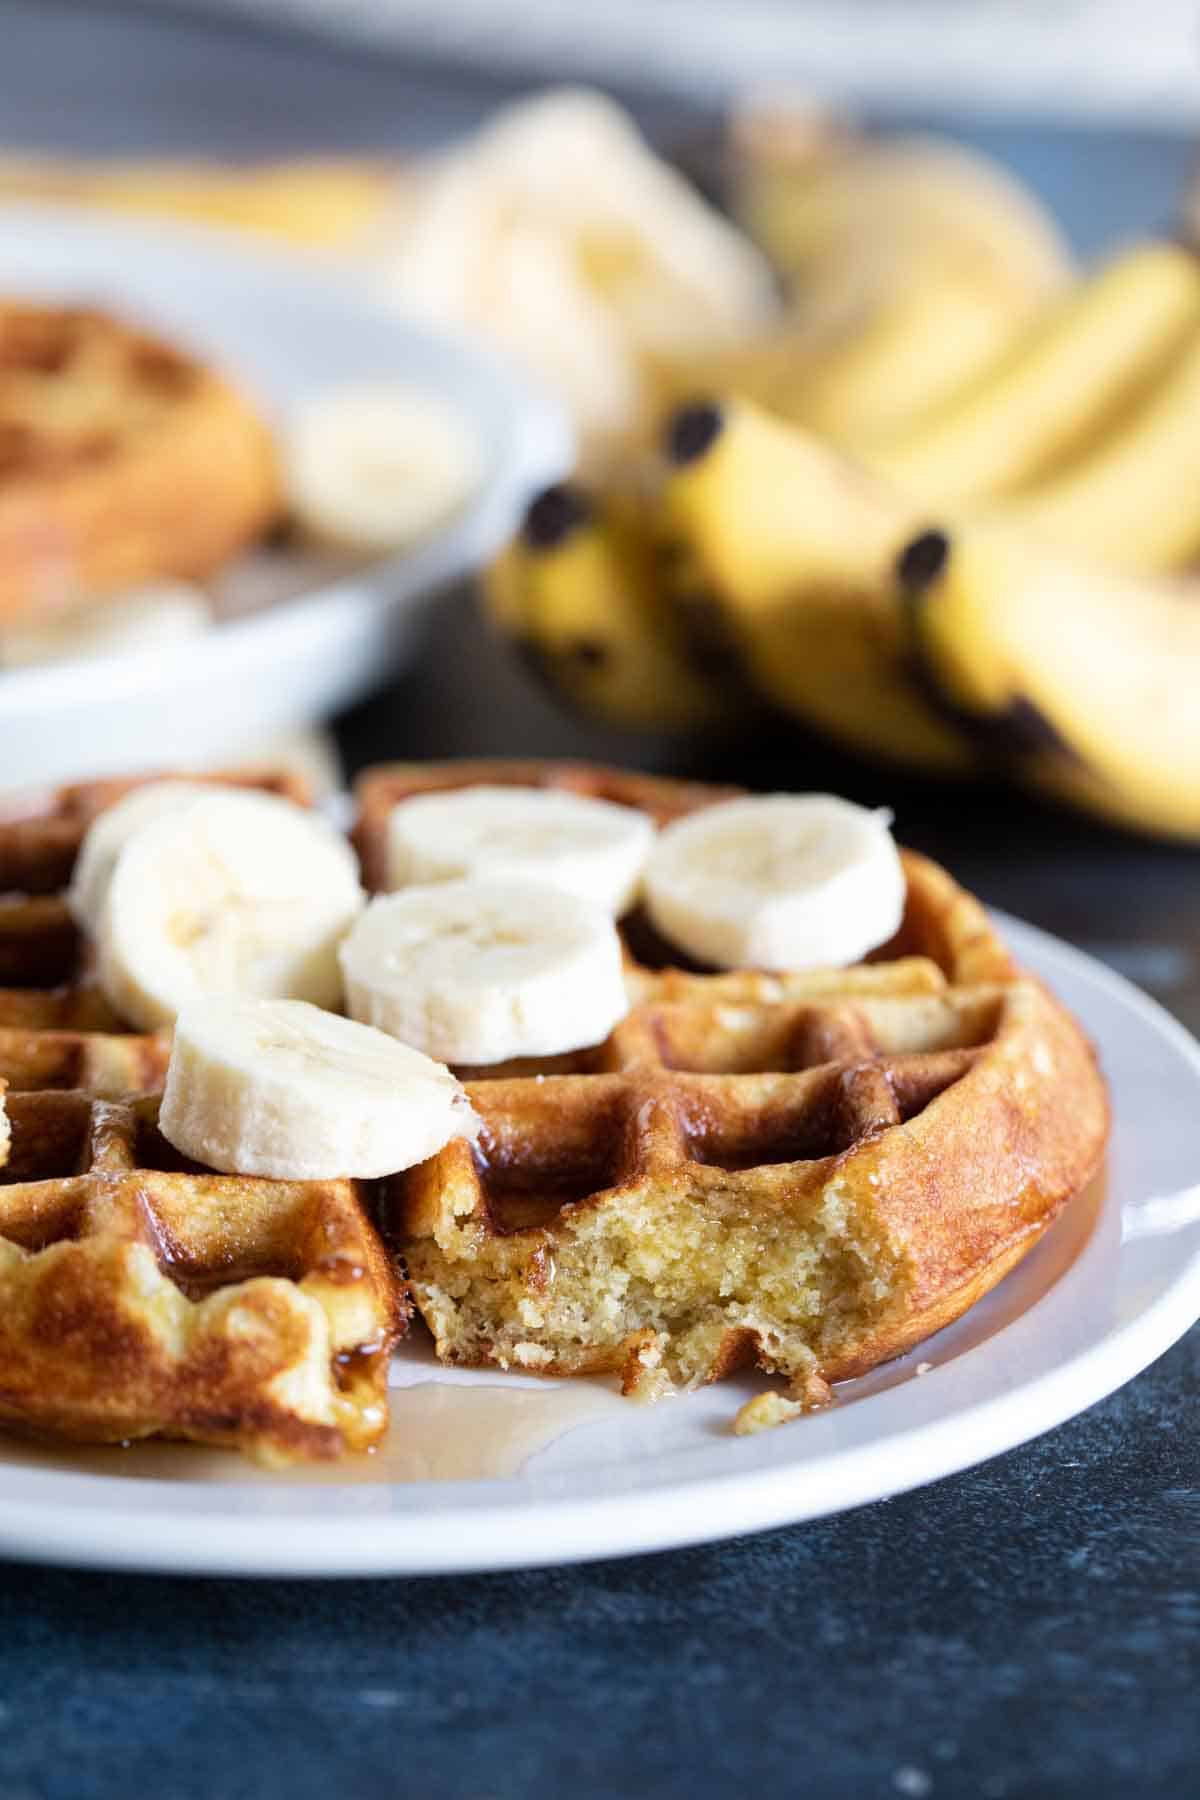 Banana Waffle topped with fresh bananas with a bite taken from it to show texture